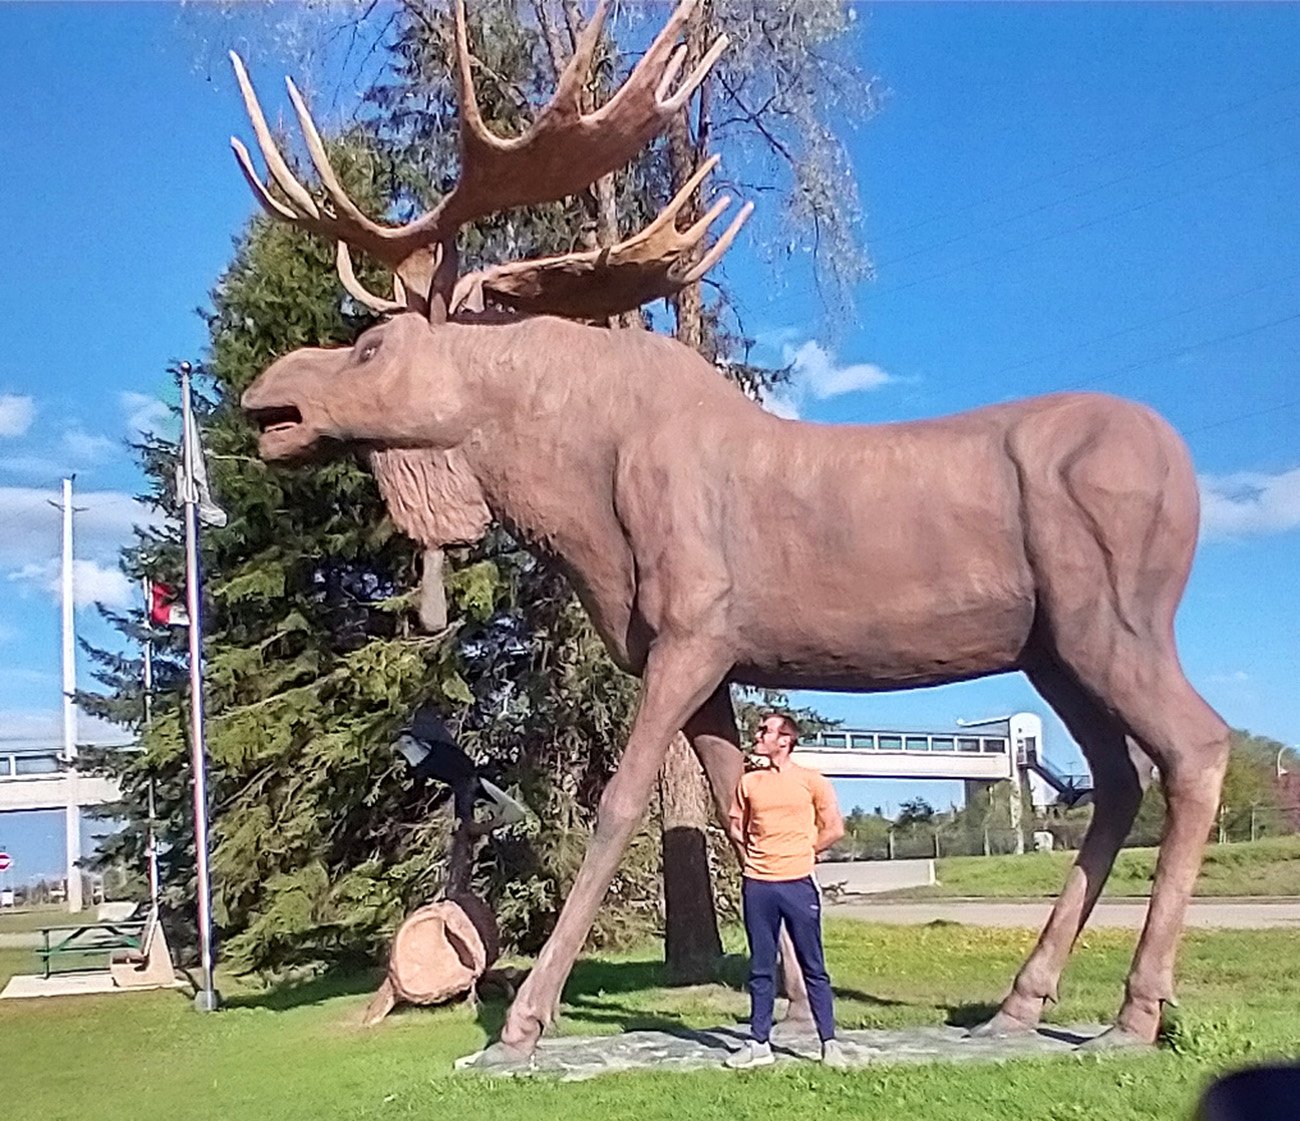 I don't remember which city this was, but they also had a Moose. 